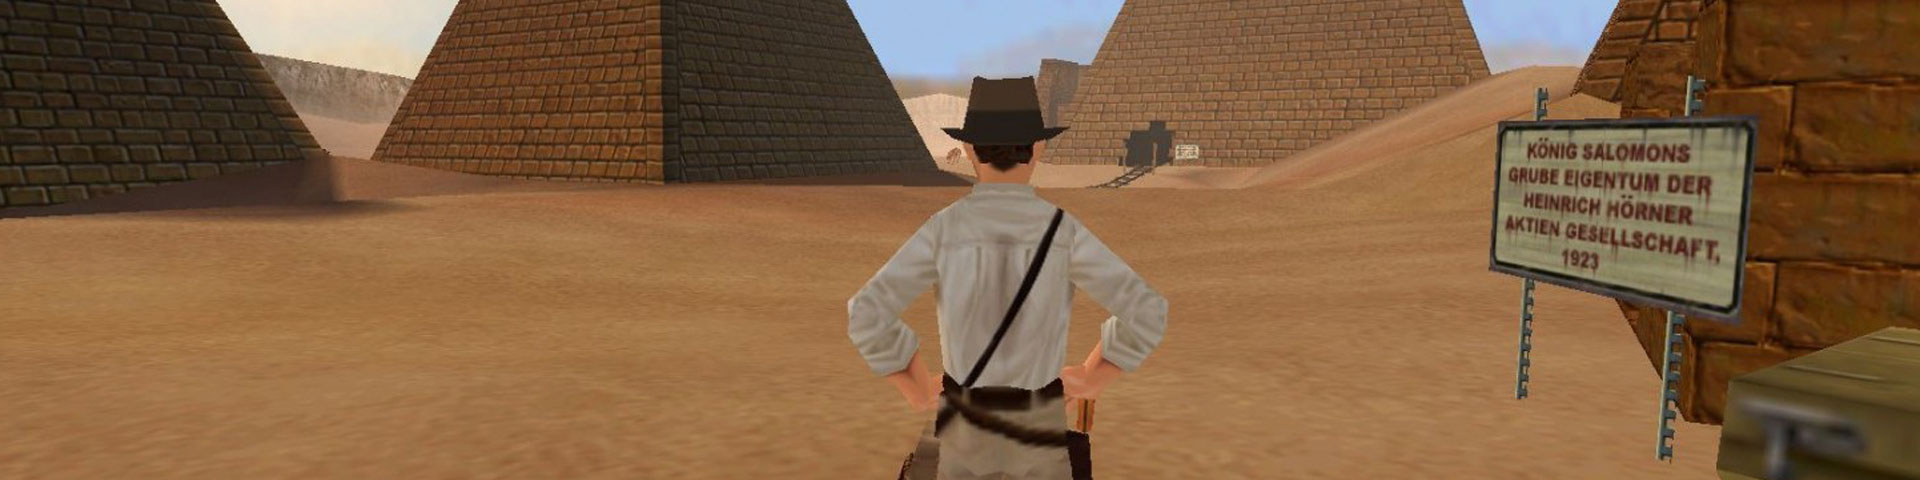 A digital rendering of indiana jones stands with his back to the viewer, surveying some pyramids in the desert.